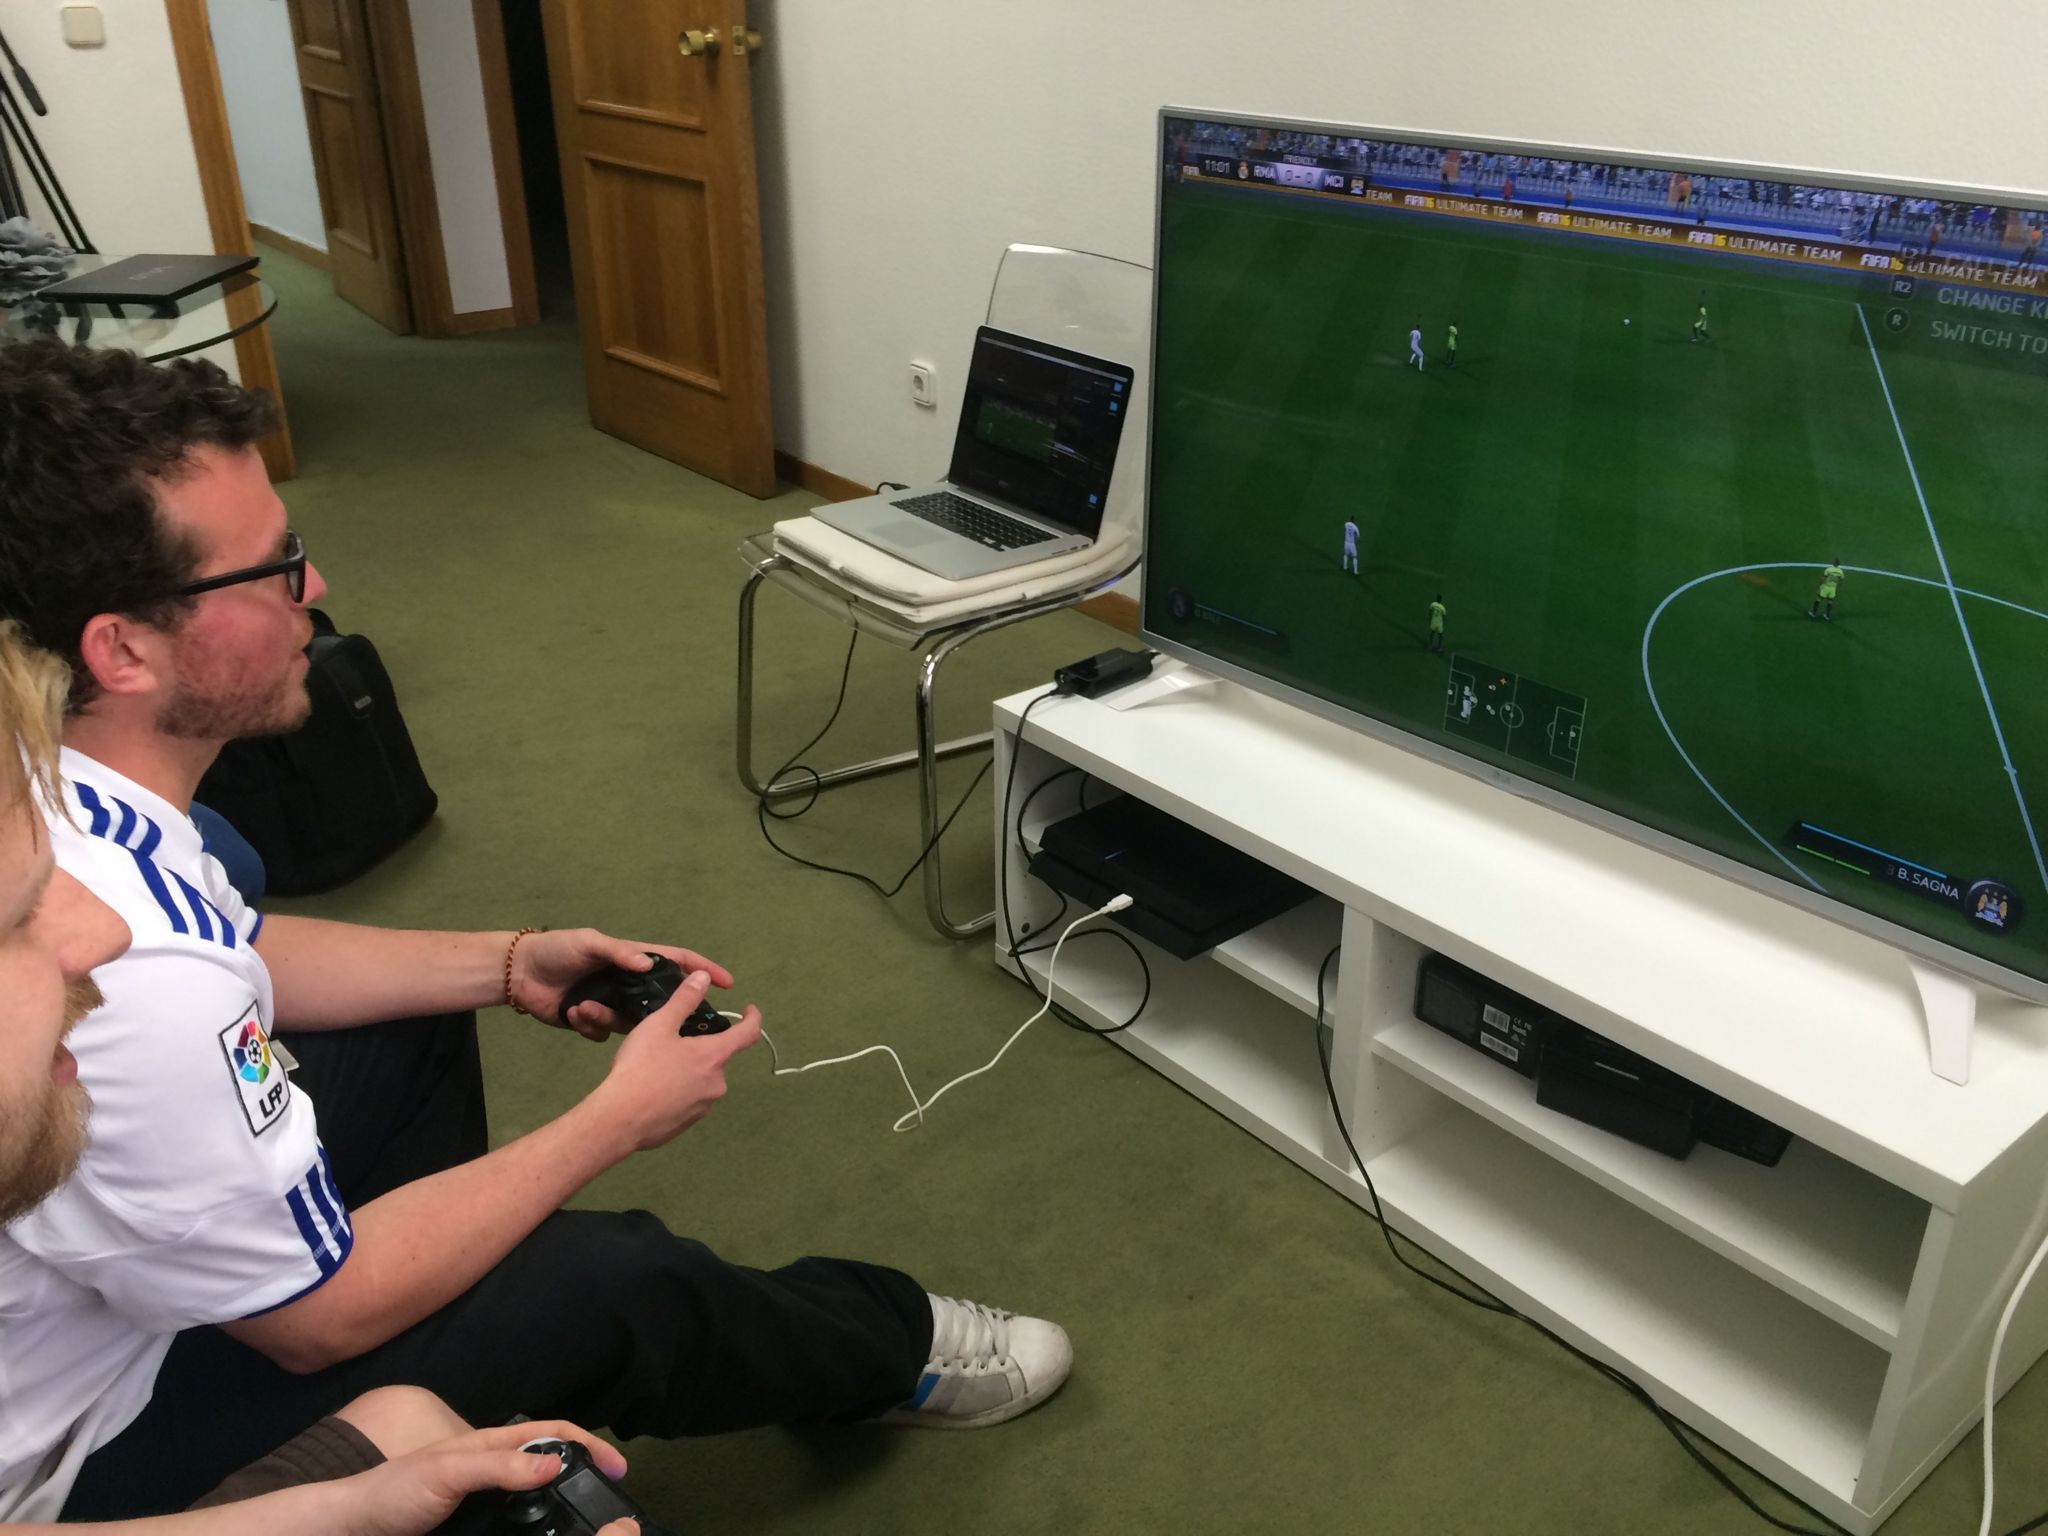 Man City and Real fans have a Fifa battle ahead of their Champions League clash